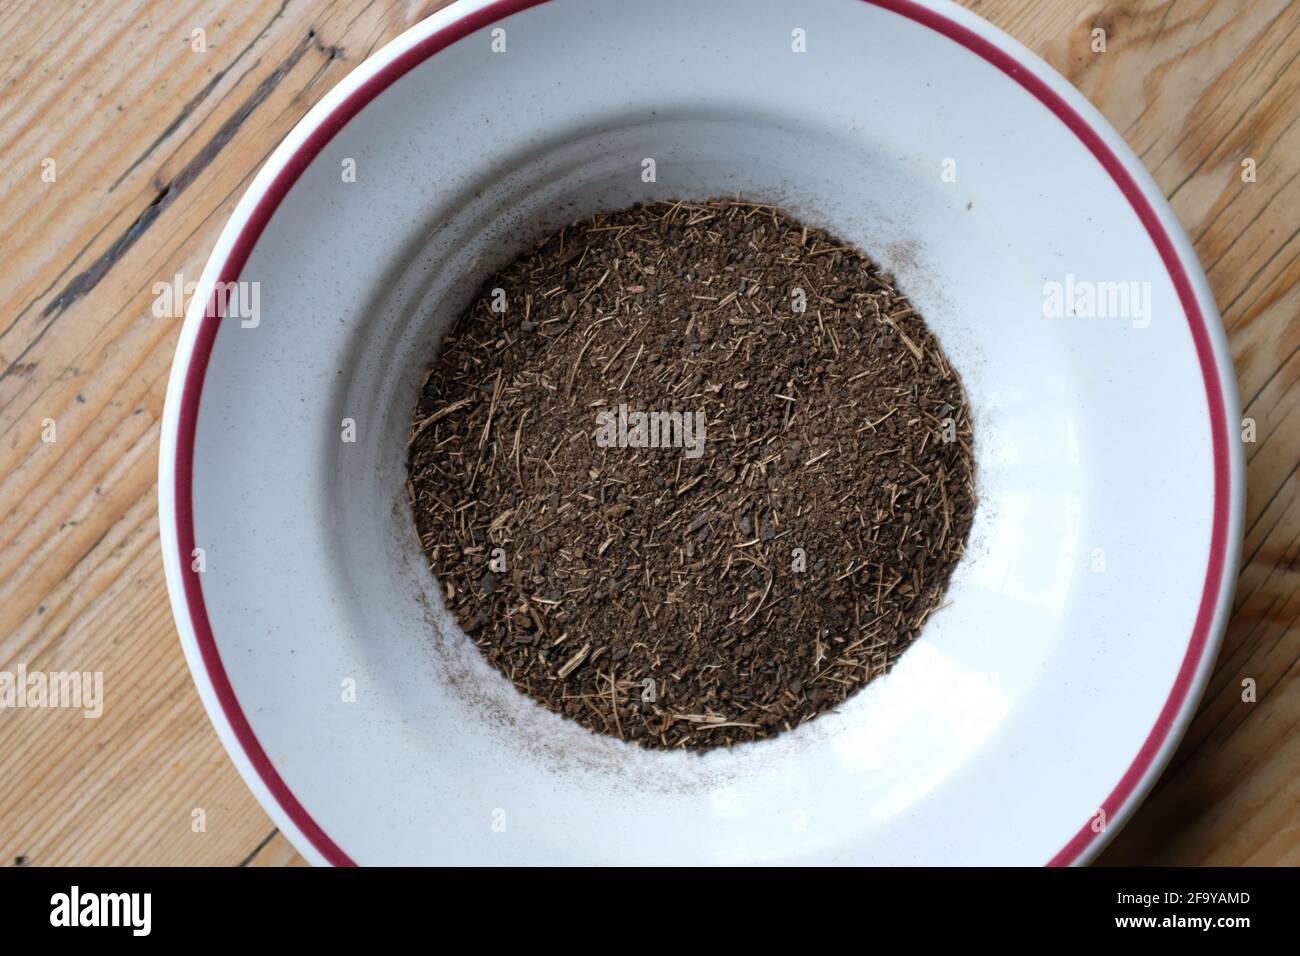 Dried bananas crushed into powder to be used as food, compost for growing tomatoes. Stock Photo